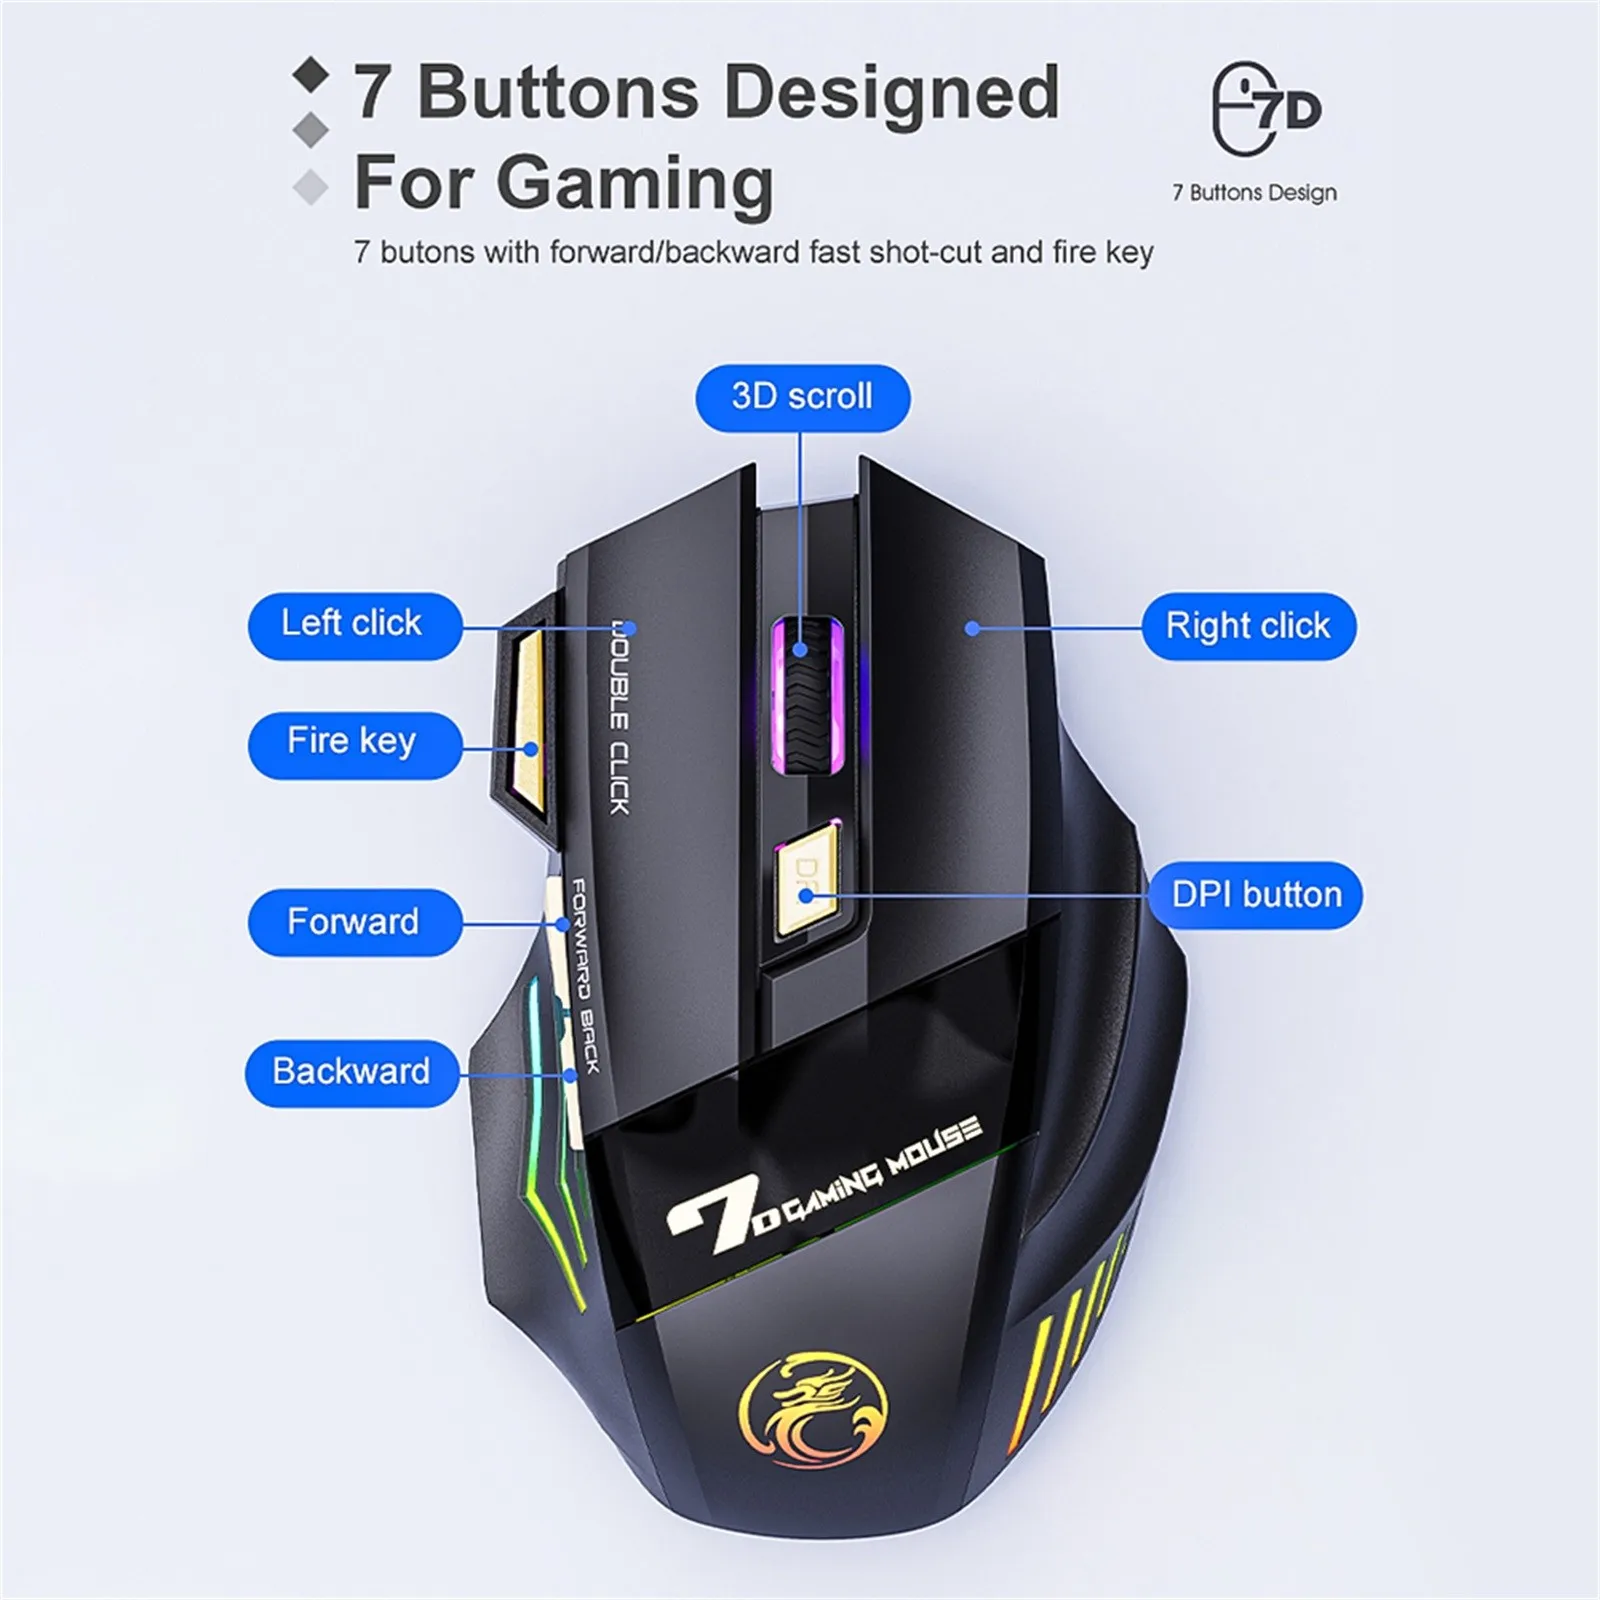 Mute Ergonomic Gaming Mouse iMice GW-X7 7 Buttons Rechargeable RGB Wireless Adjustable DPI Ergonomic Gaming Office Mice pink computer mouse